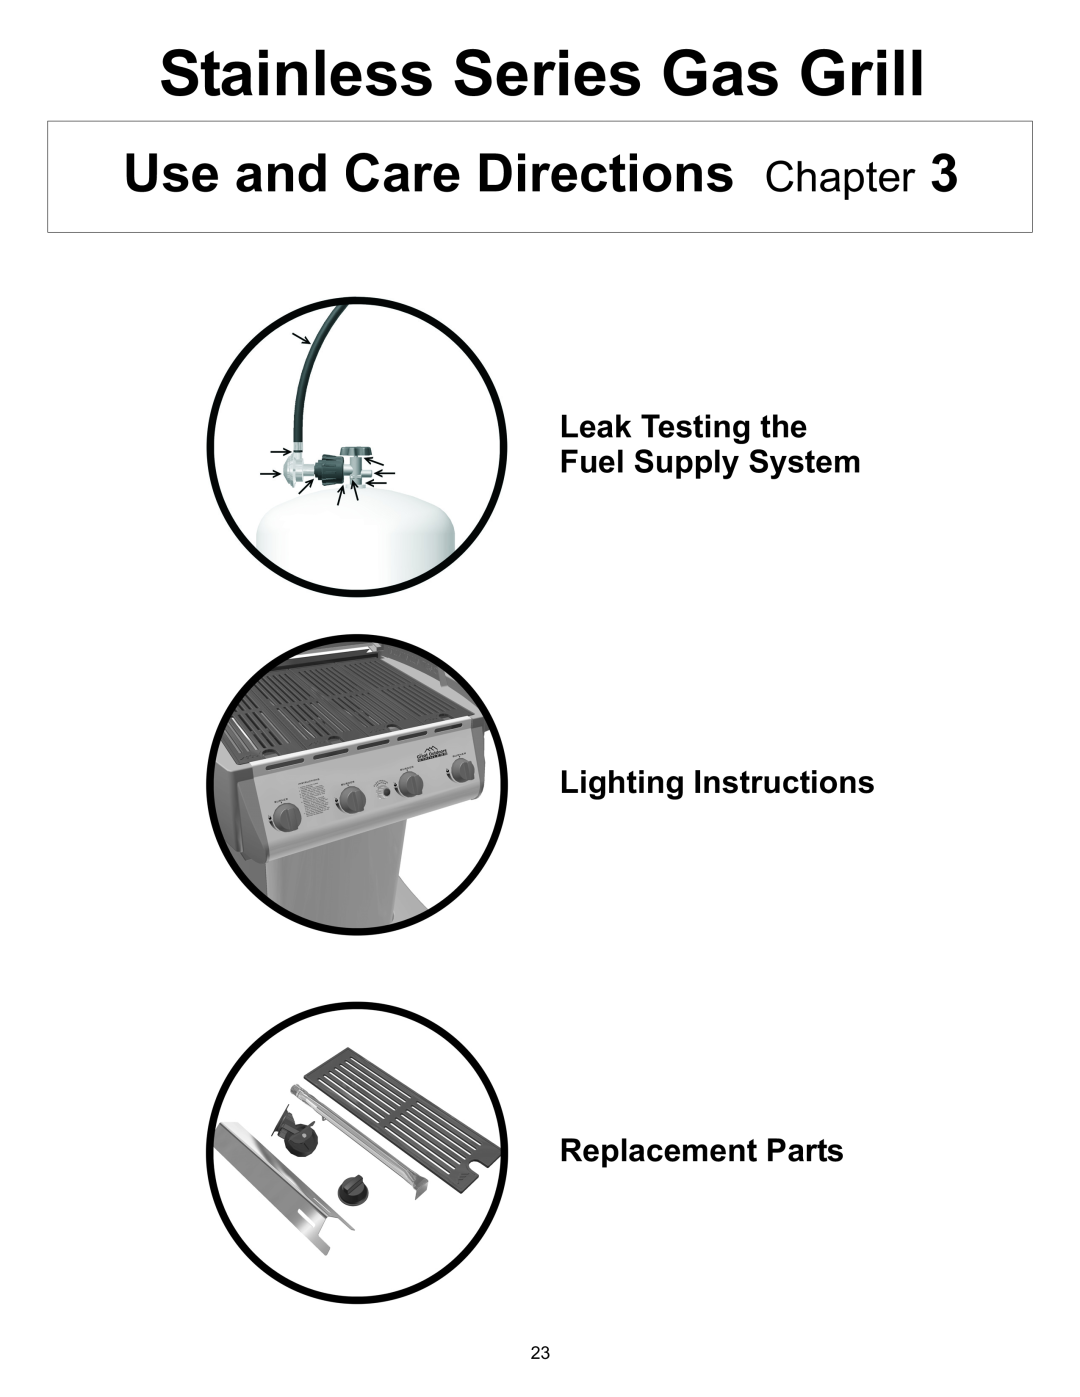 Vermont Casting Use and Care Directions Chapter, Leak Testing the Fuel Supply System, Stainless Series Gas Grill 